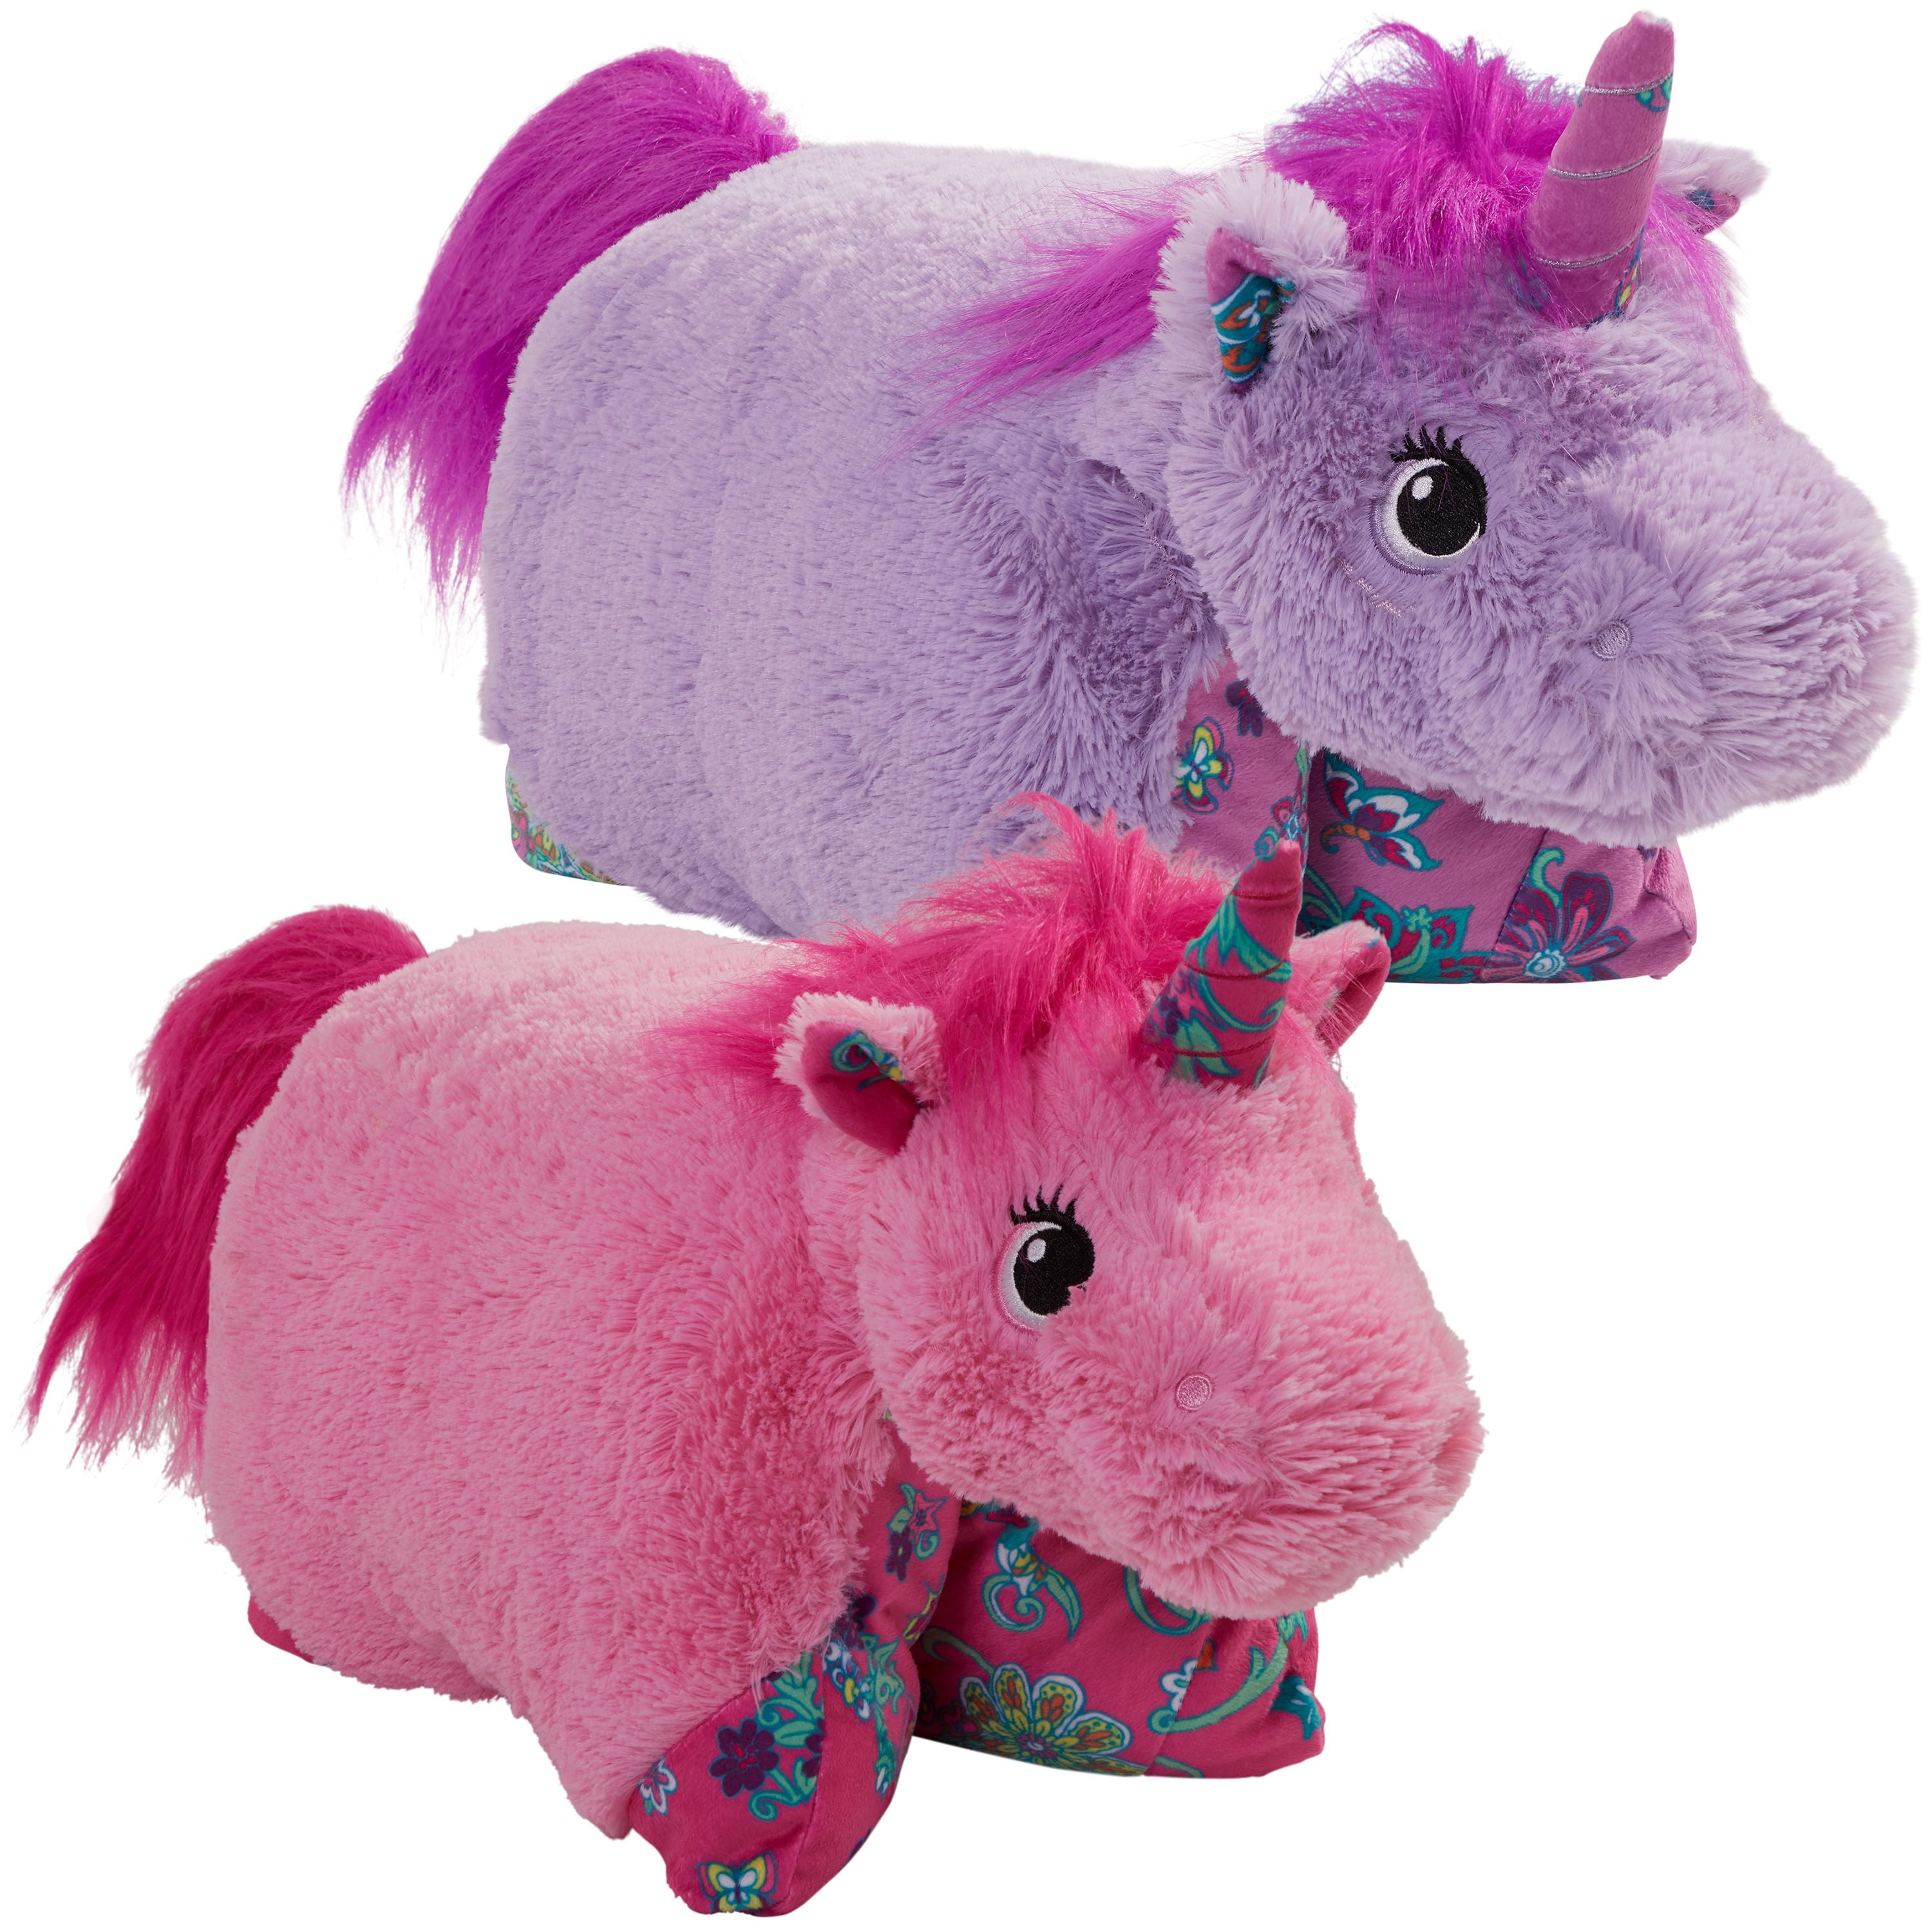 Colorful Unicorn Pillow Pet Combo Pack Pink and Lavender